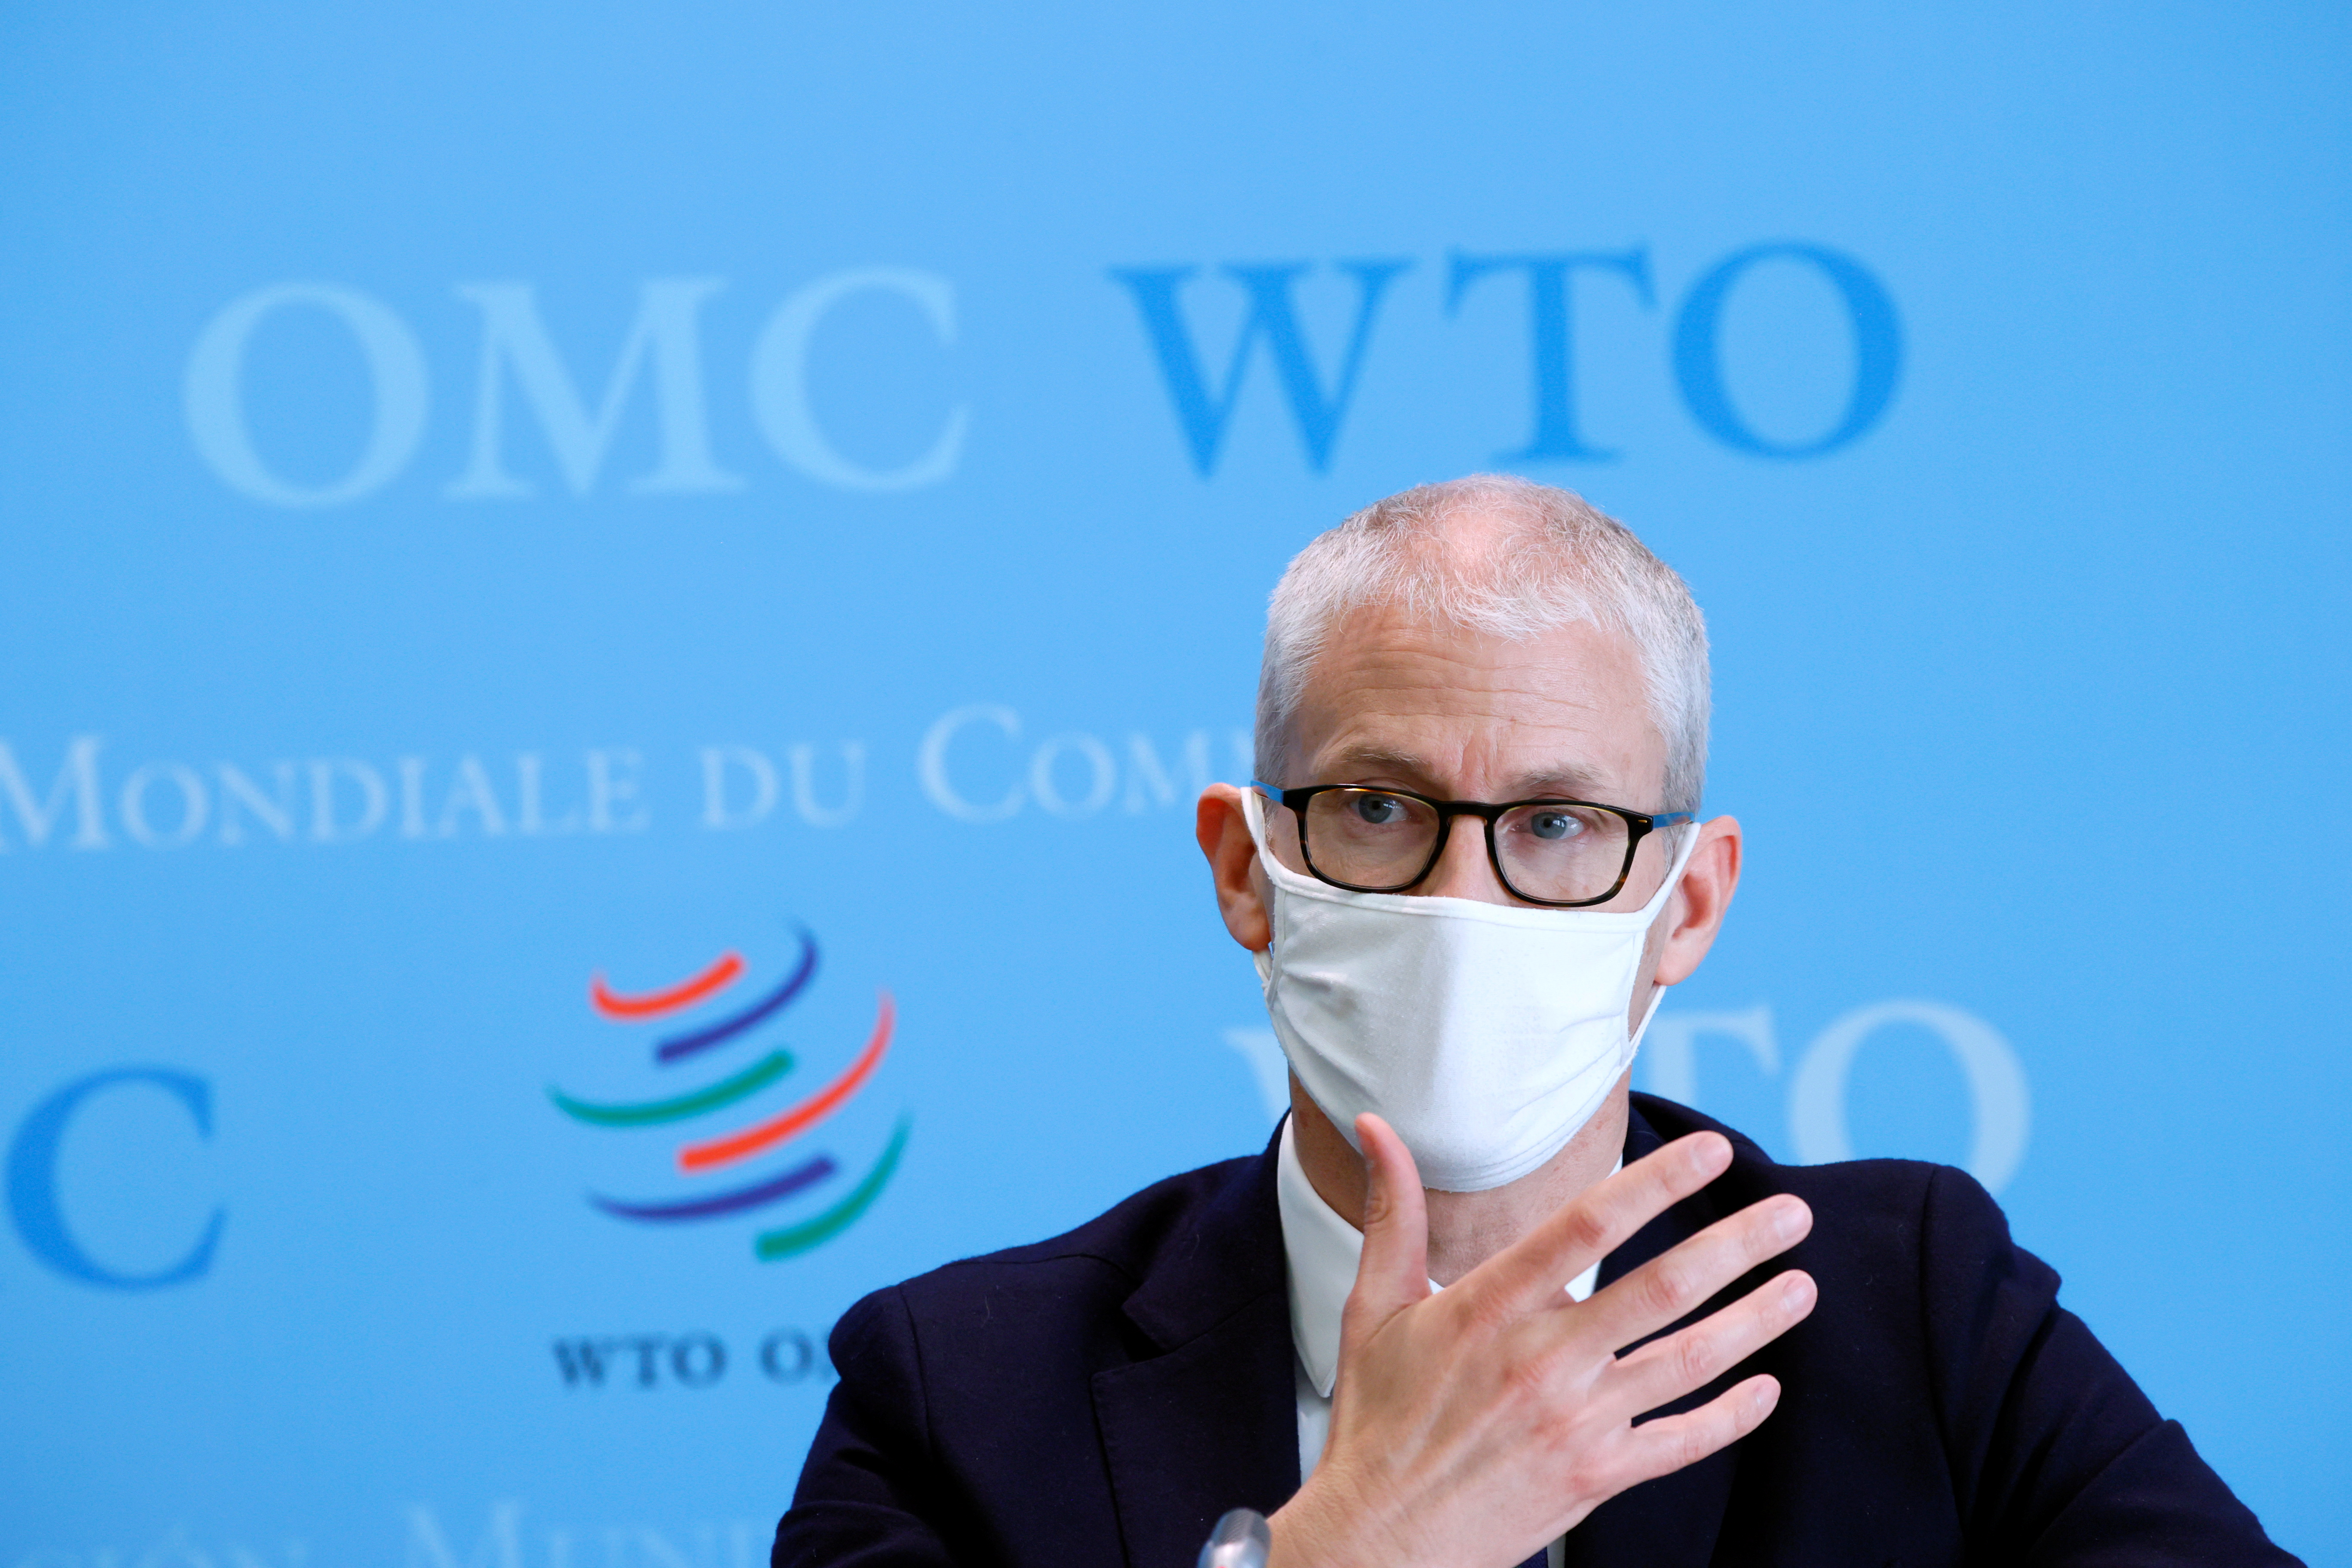 Franck Riester, France's minister delegate for foreign trade and economic attractiveness, speaks at a joint news conference with the French finance minister and WTO's director-general at WTO headquarters in Geneva, Switzerland, April 1, 2021. REUTERS/Denis Balibouse/Pool